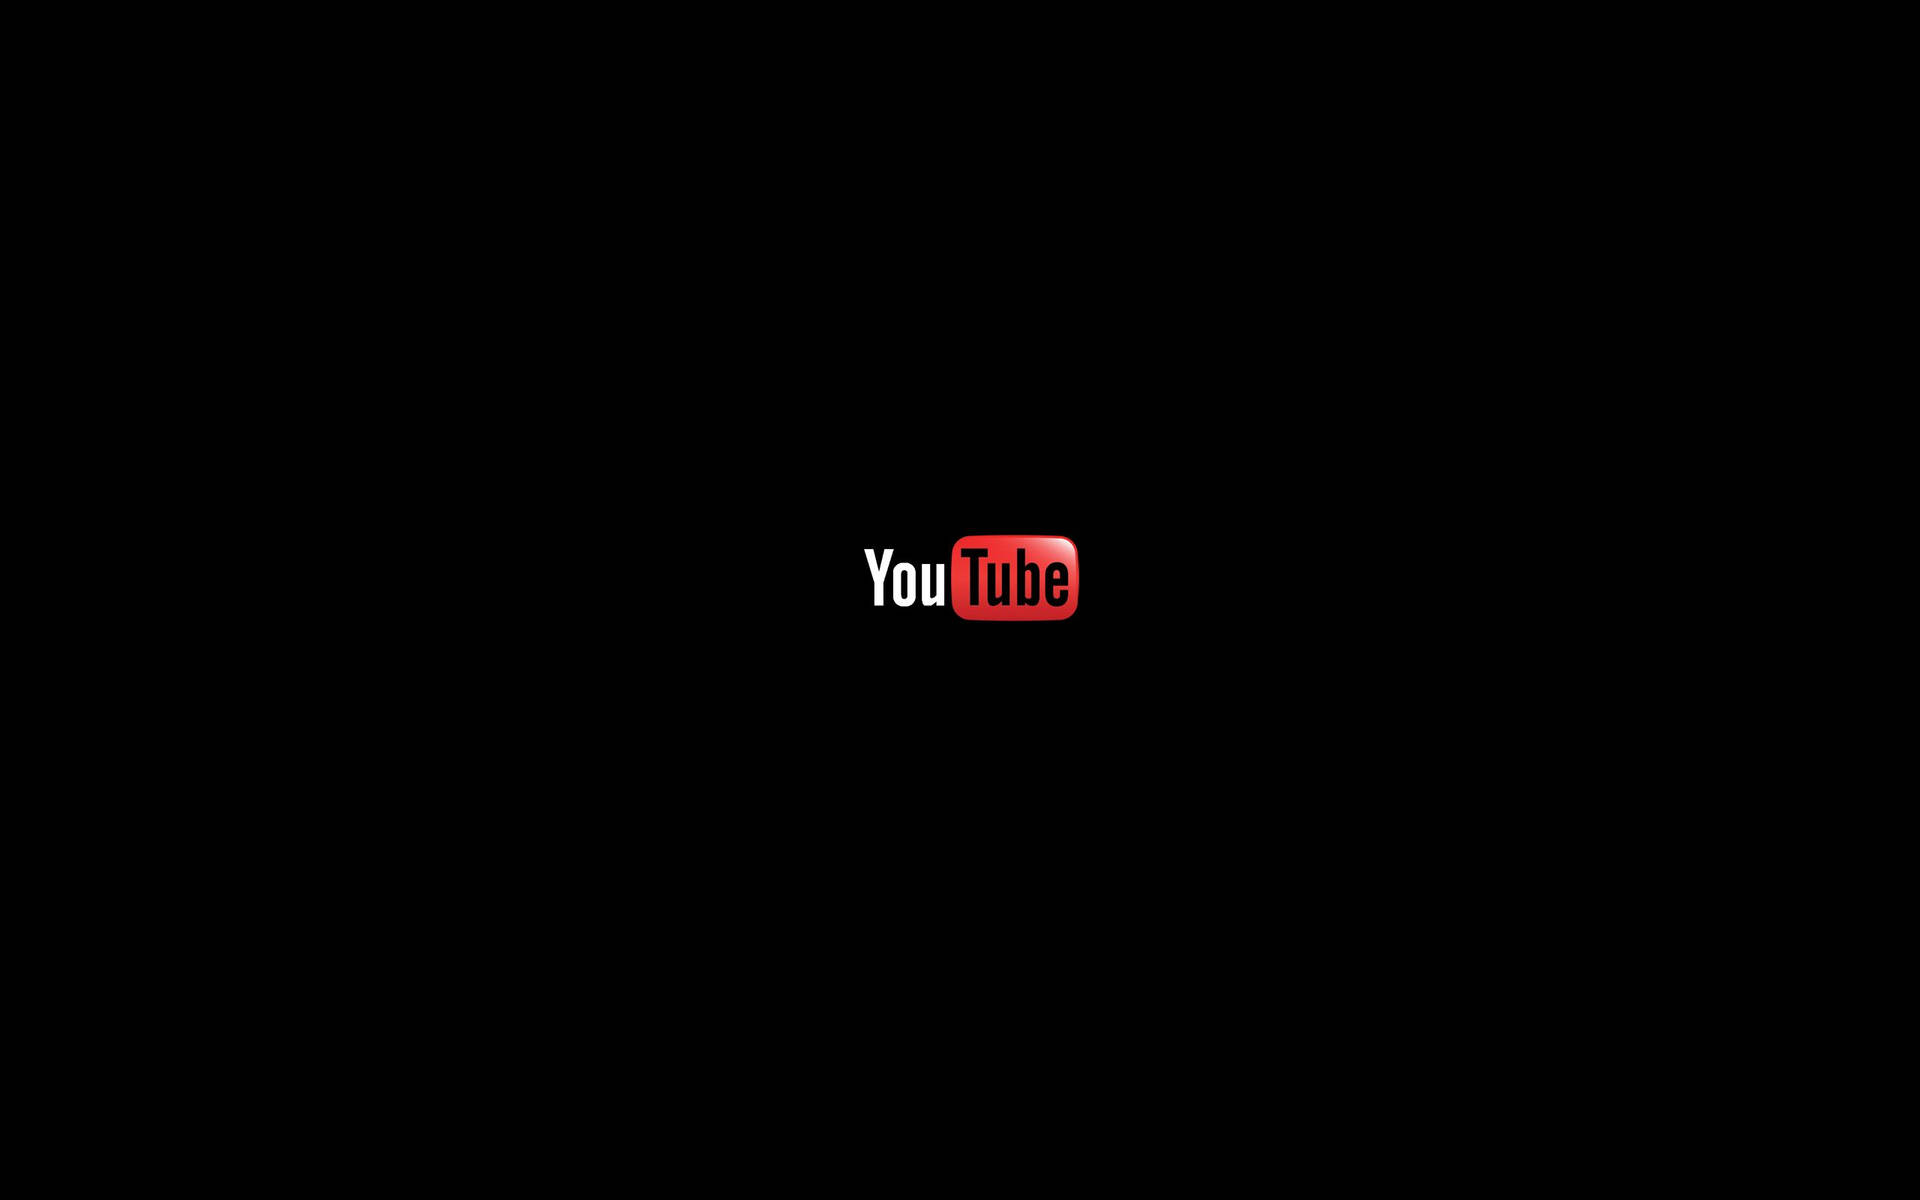 Download Small Youtube Logo On Black Background Wallpaper 